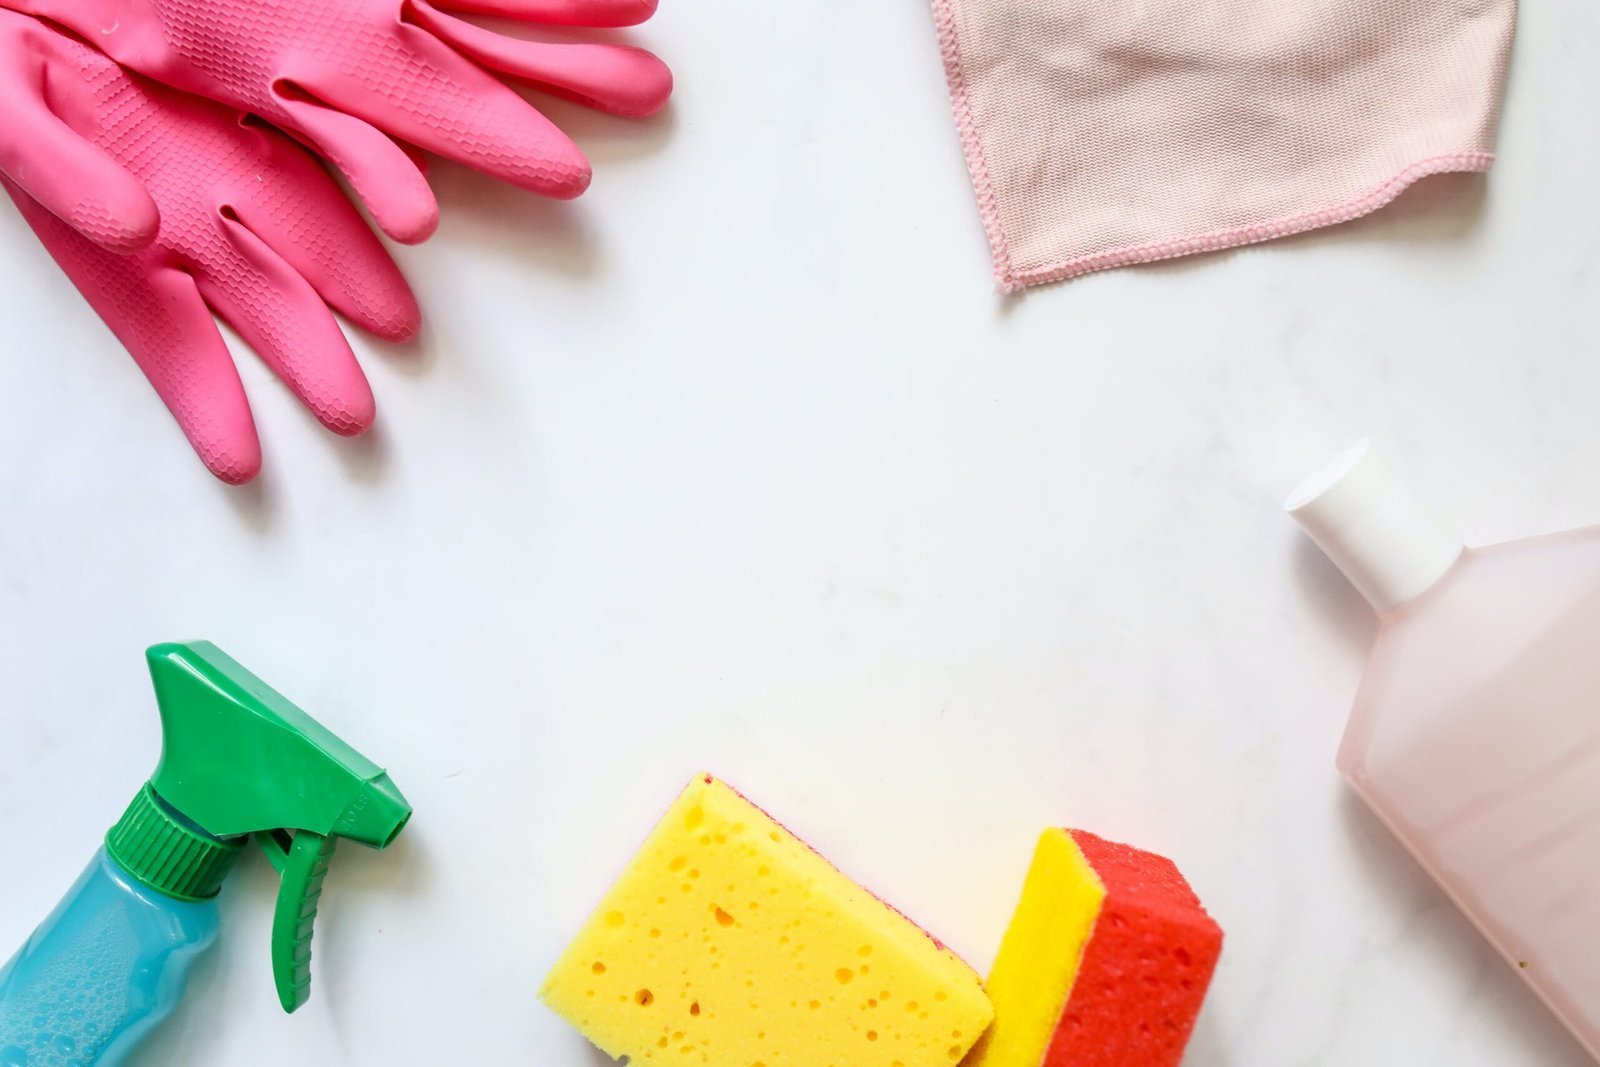 A flat lay of cleaning supplies on a white surface, including pink rubber gloves, a green spray bottle, a pink microfiber cloth, and two sponges, one yellow and one red.